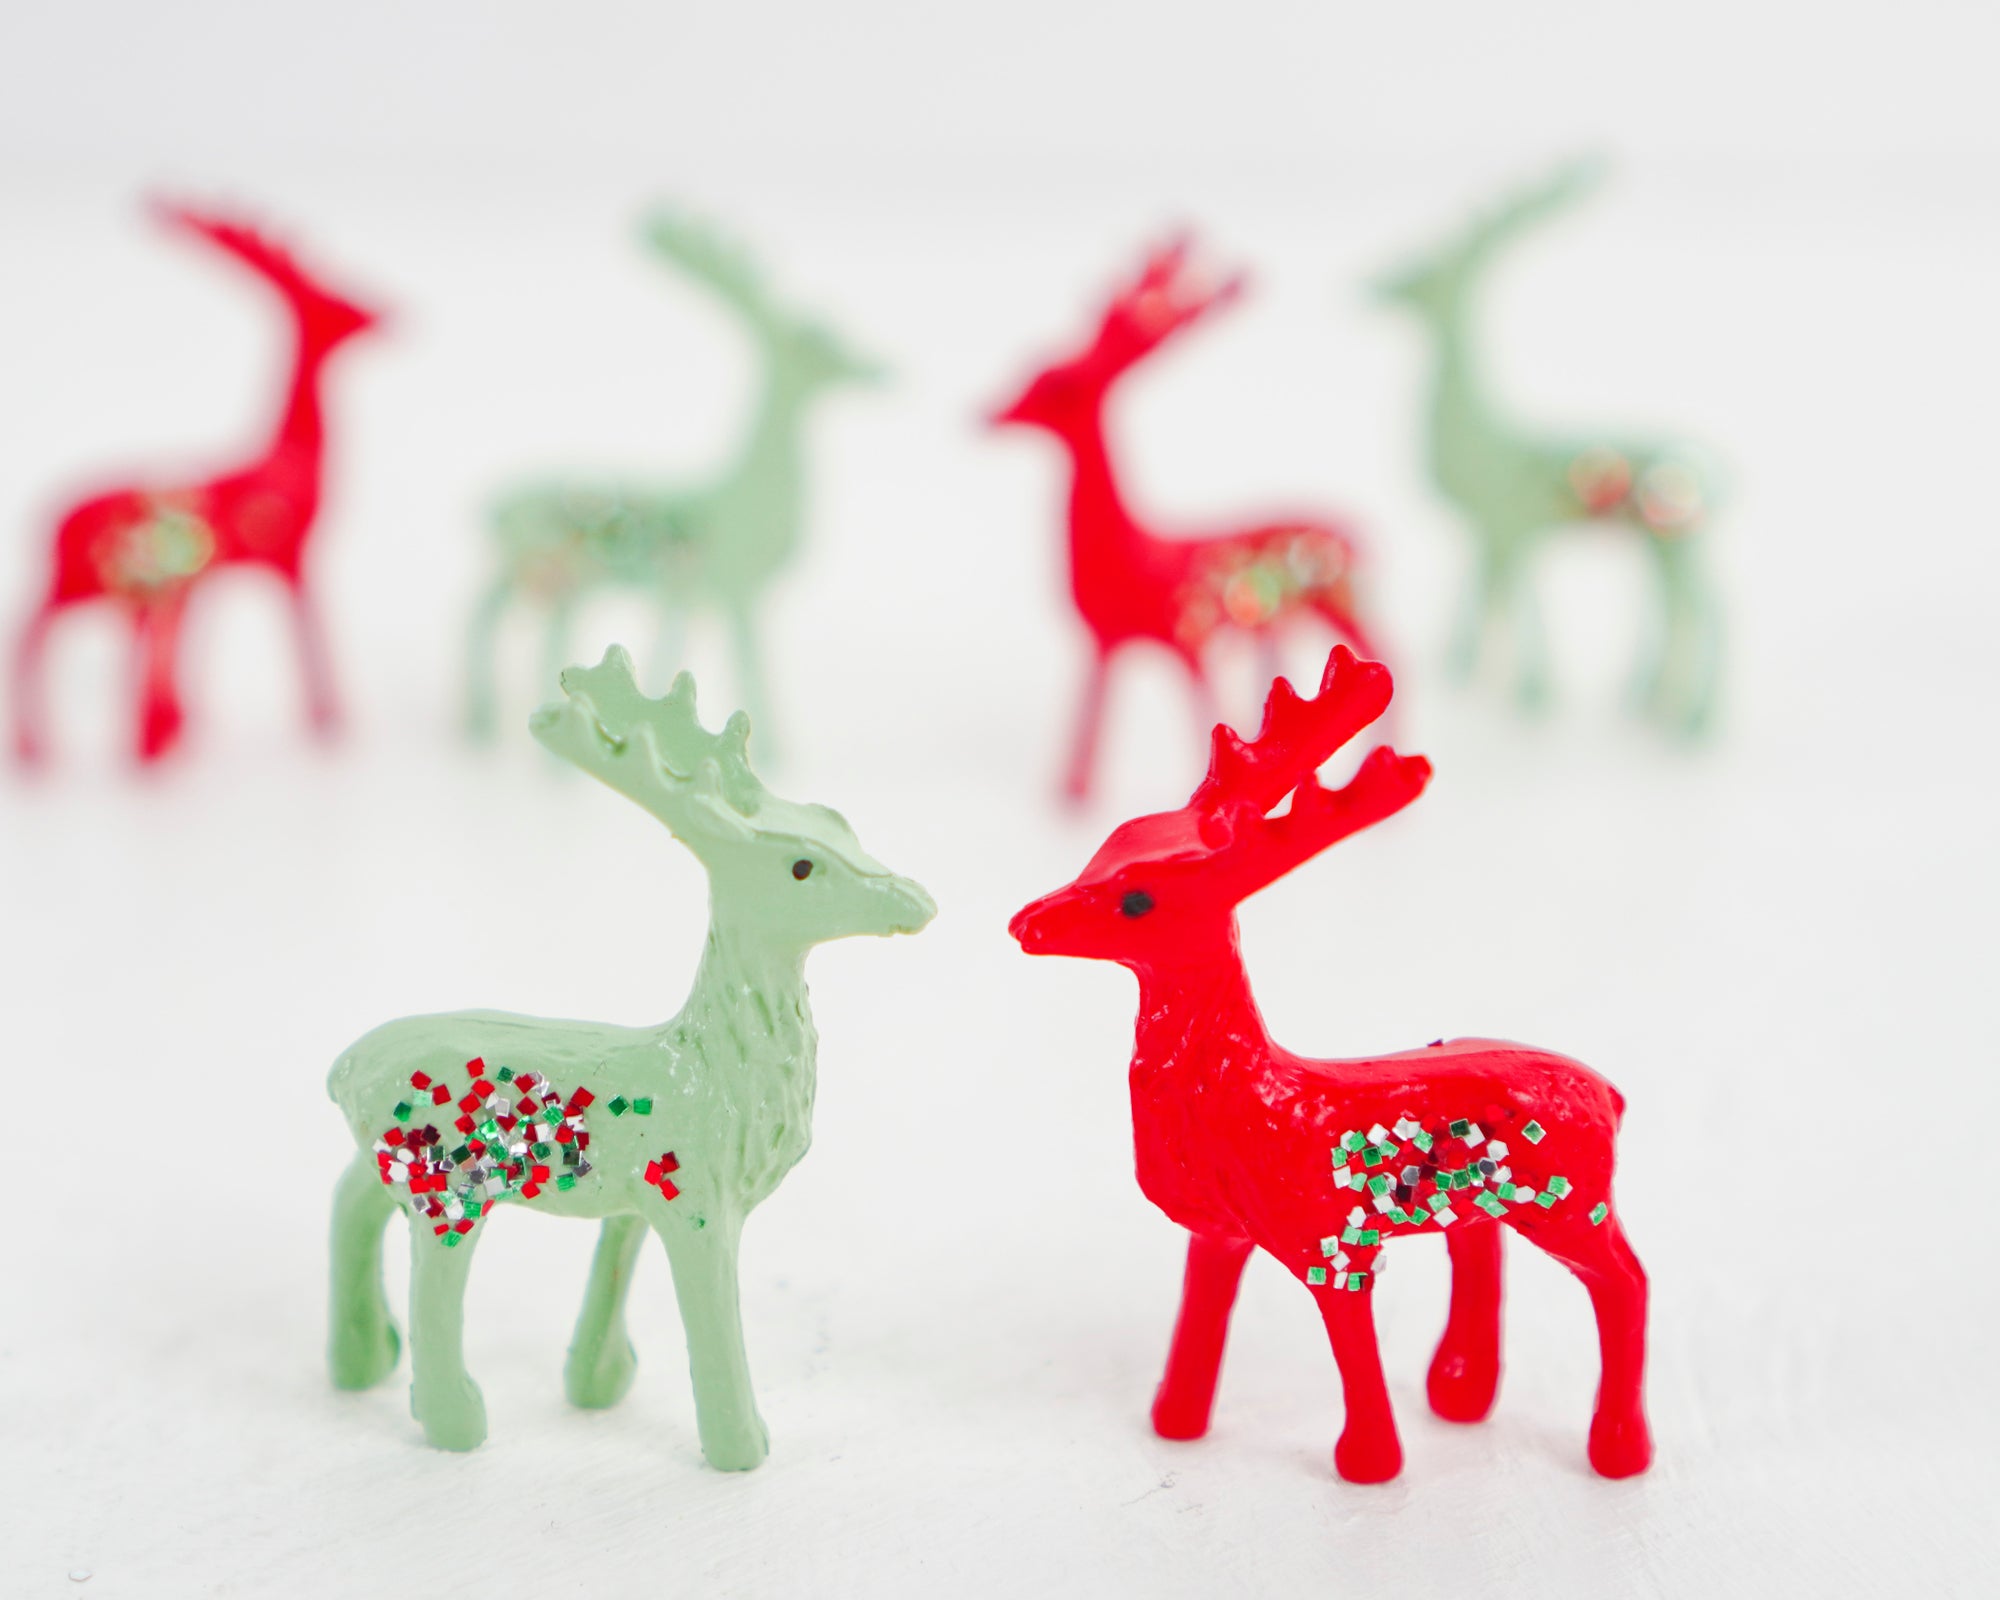 Miniature Christmas Deer - 6 Red and Green Plastic Reindeer with Glitter